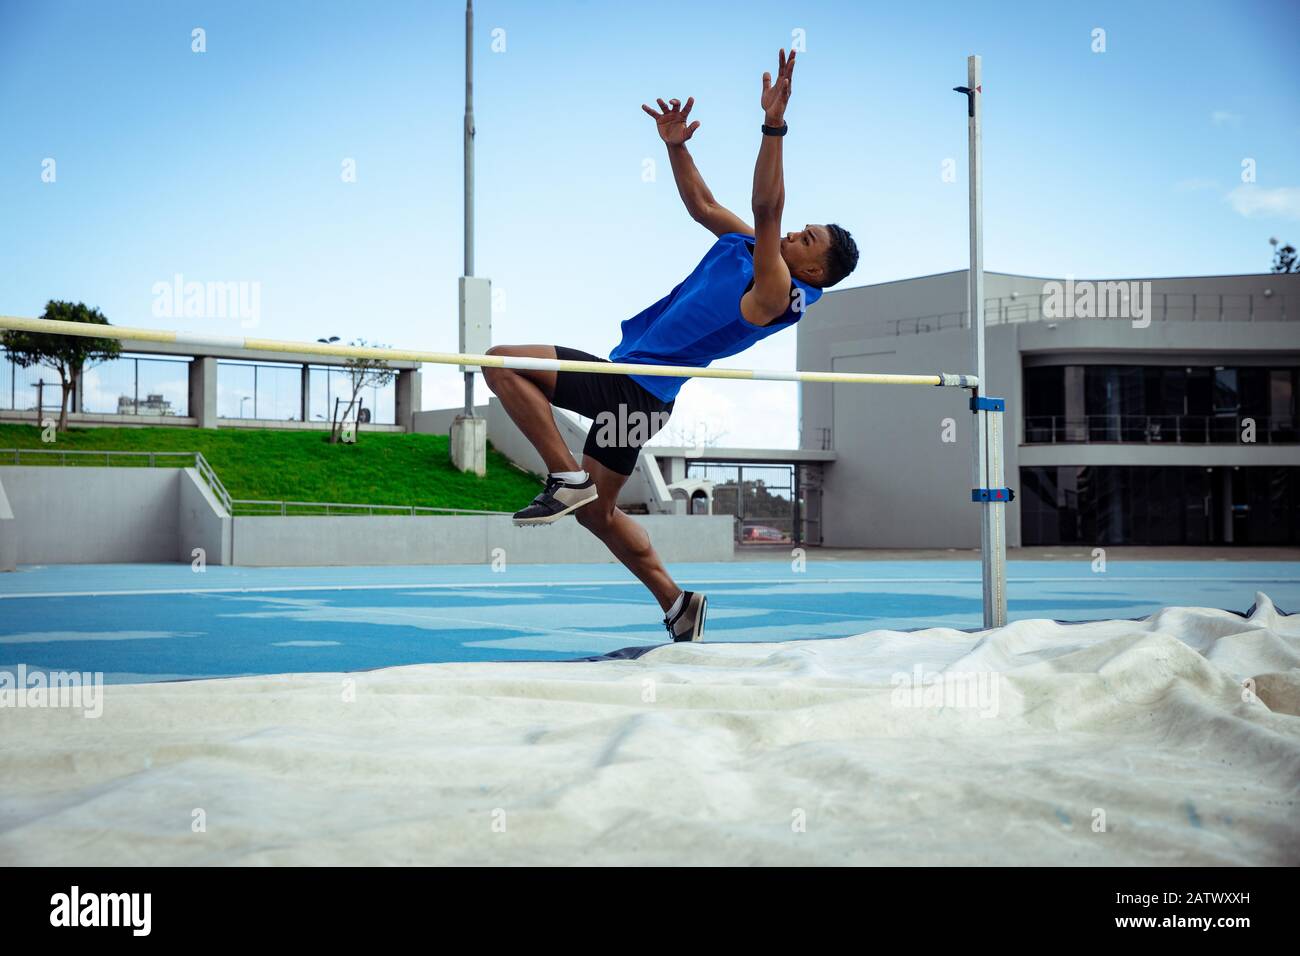 Athlete doing a high jump Stock Photo